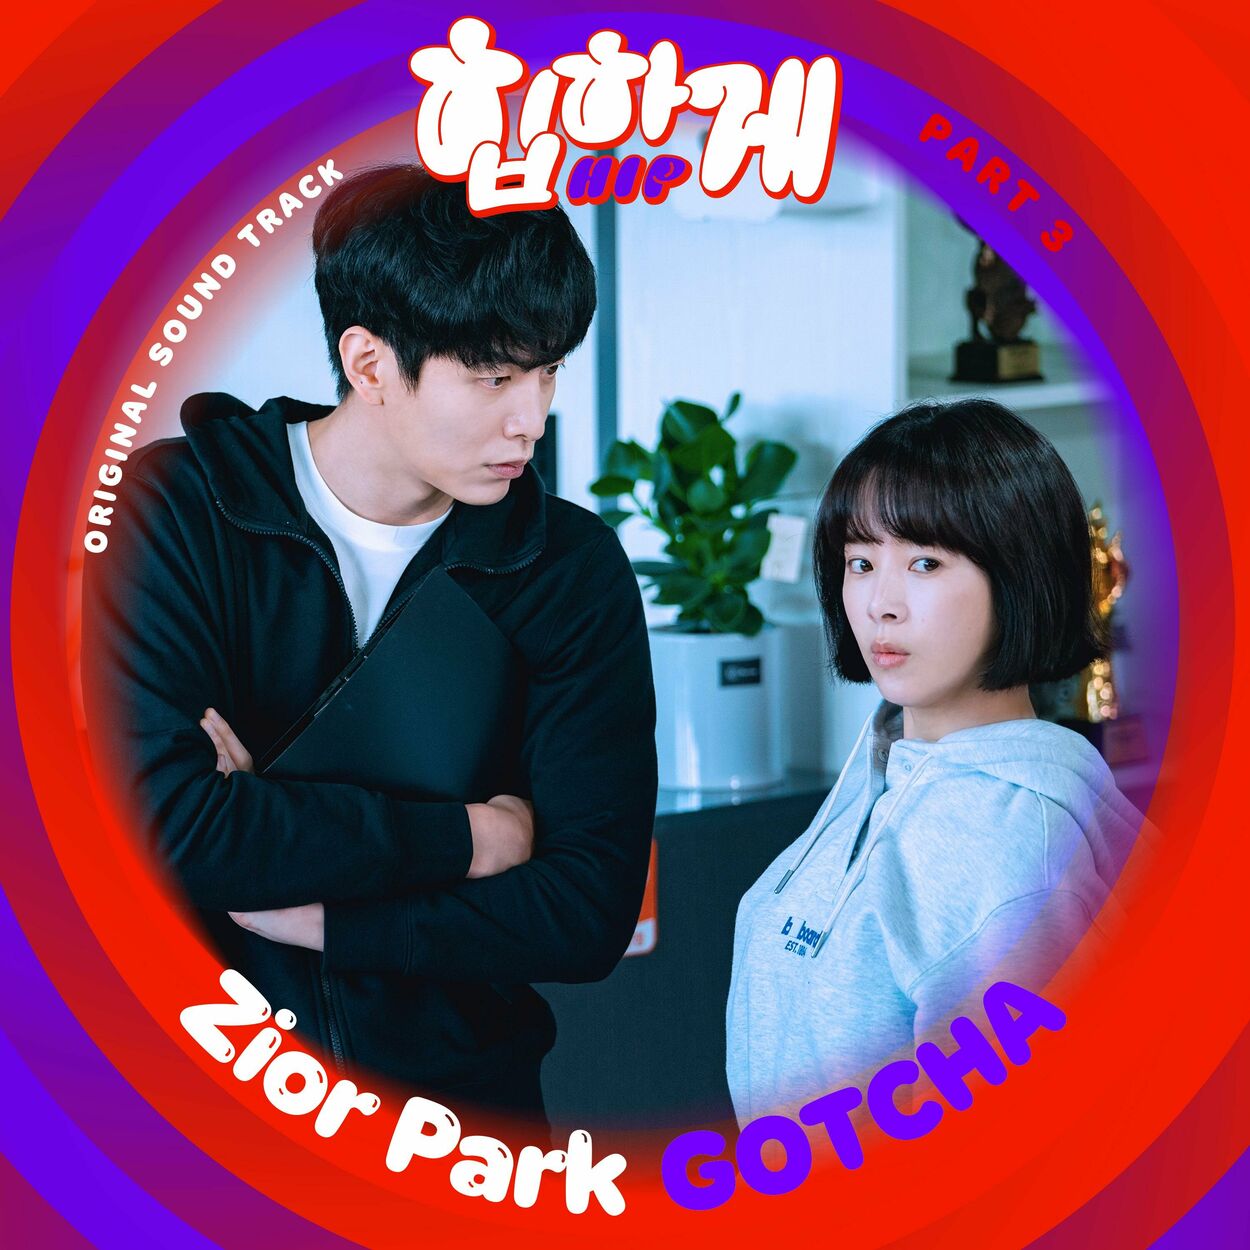 Zior Park – Behind you touch OST Part 3